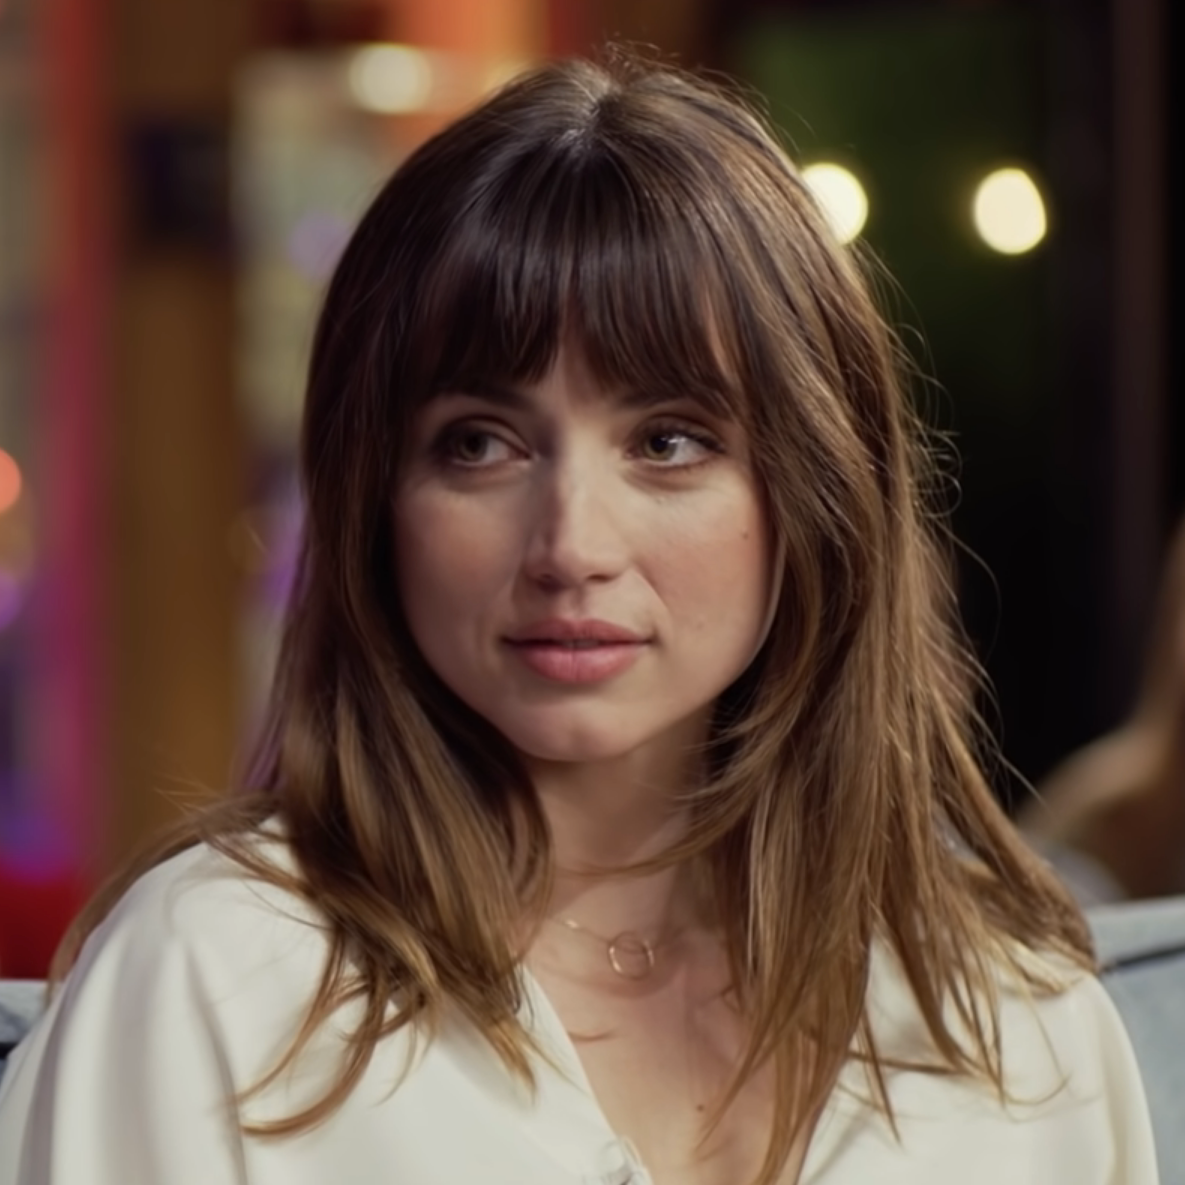 Who Is Ana de Armas? — Here's What You Need to Know – SheKnows